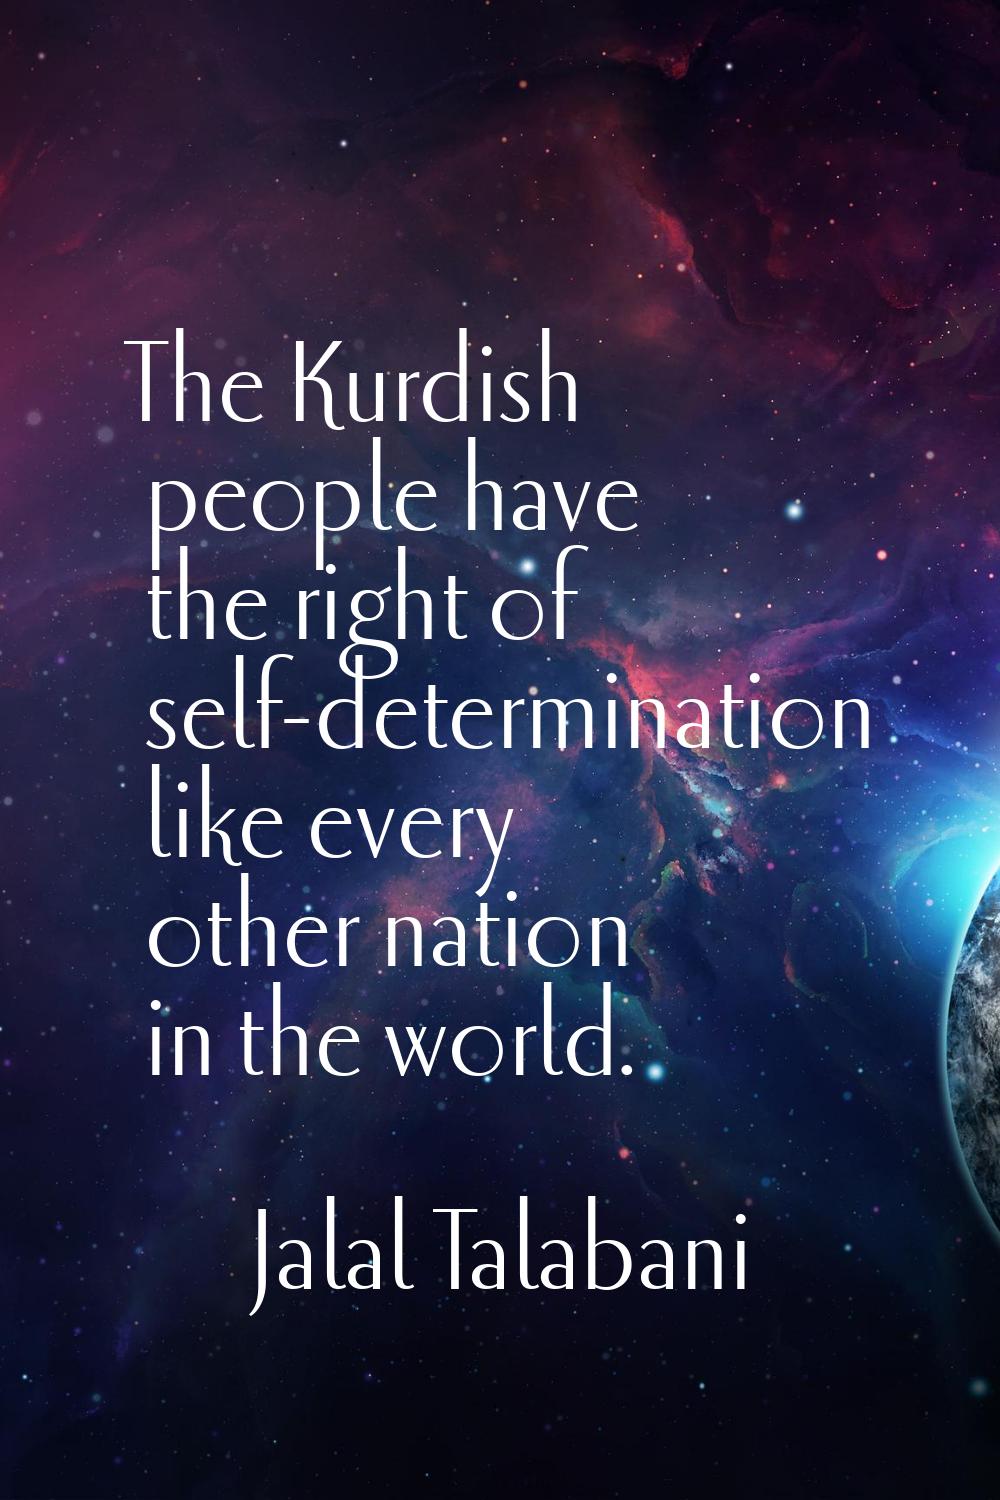 The Kurdish people have the right of self-determination like every other nation in the world.